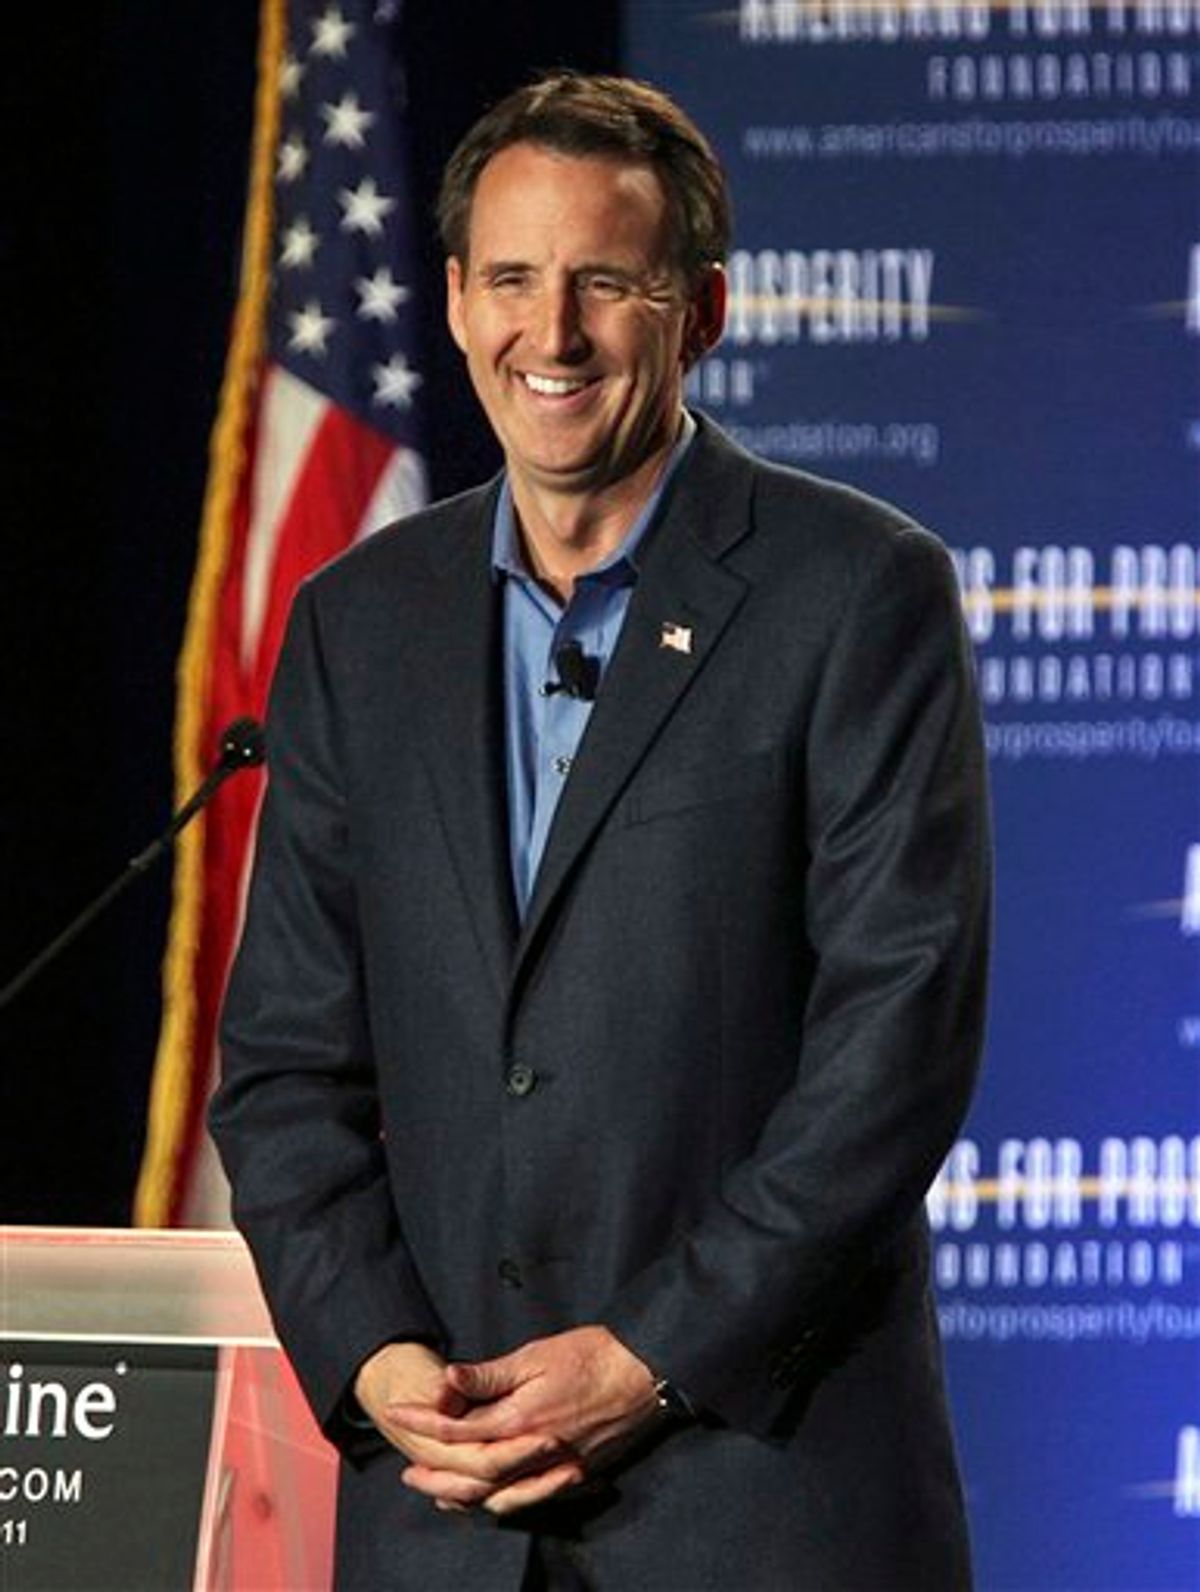 Republican presidential hopeful, former Minnesota Gov. Tim Pawlenty speaks at the AFP RightOnline Conference in Minneapolis on Saturday, June 18, 2011. (AP Photo/The Star Tribune, Jim Gehrz)  MANDATORY CREDIT; ST. PAUL PIONEER PRESS OUT; MAGS OUT; TWIN CITIES TV OUT (AP)